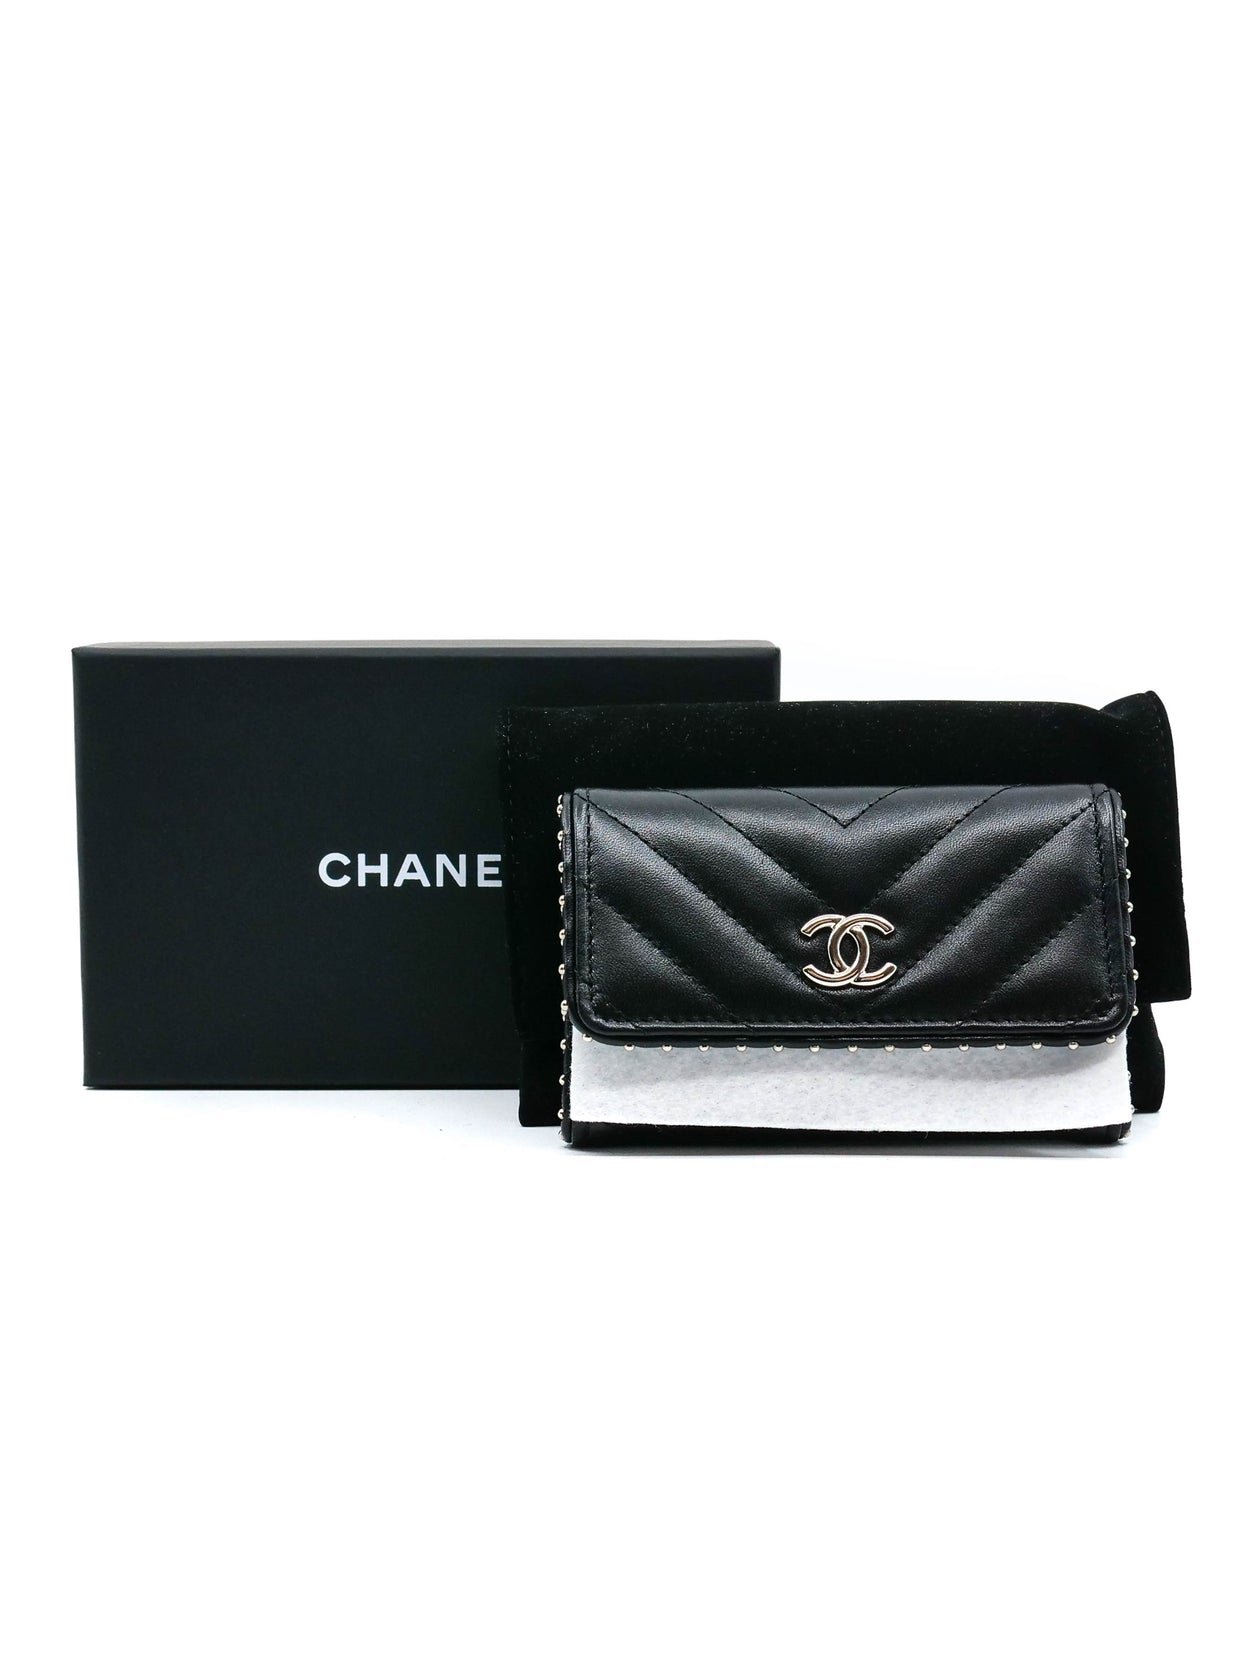 Chanel Lambskin Chevron Quilted Studded Cardholder